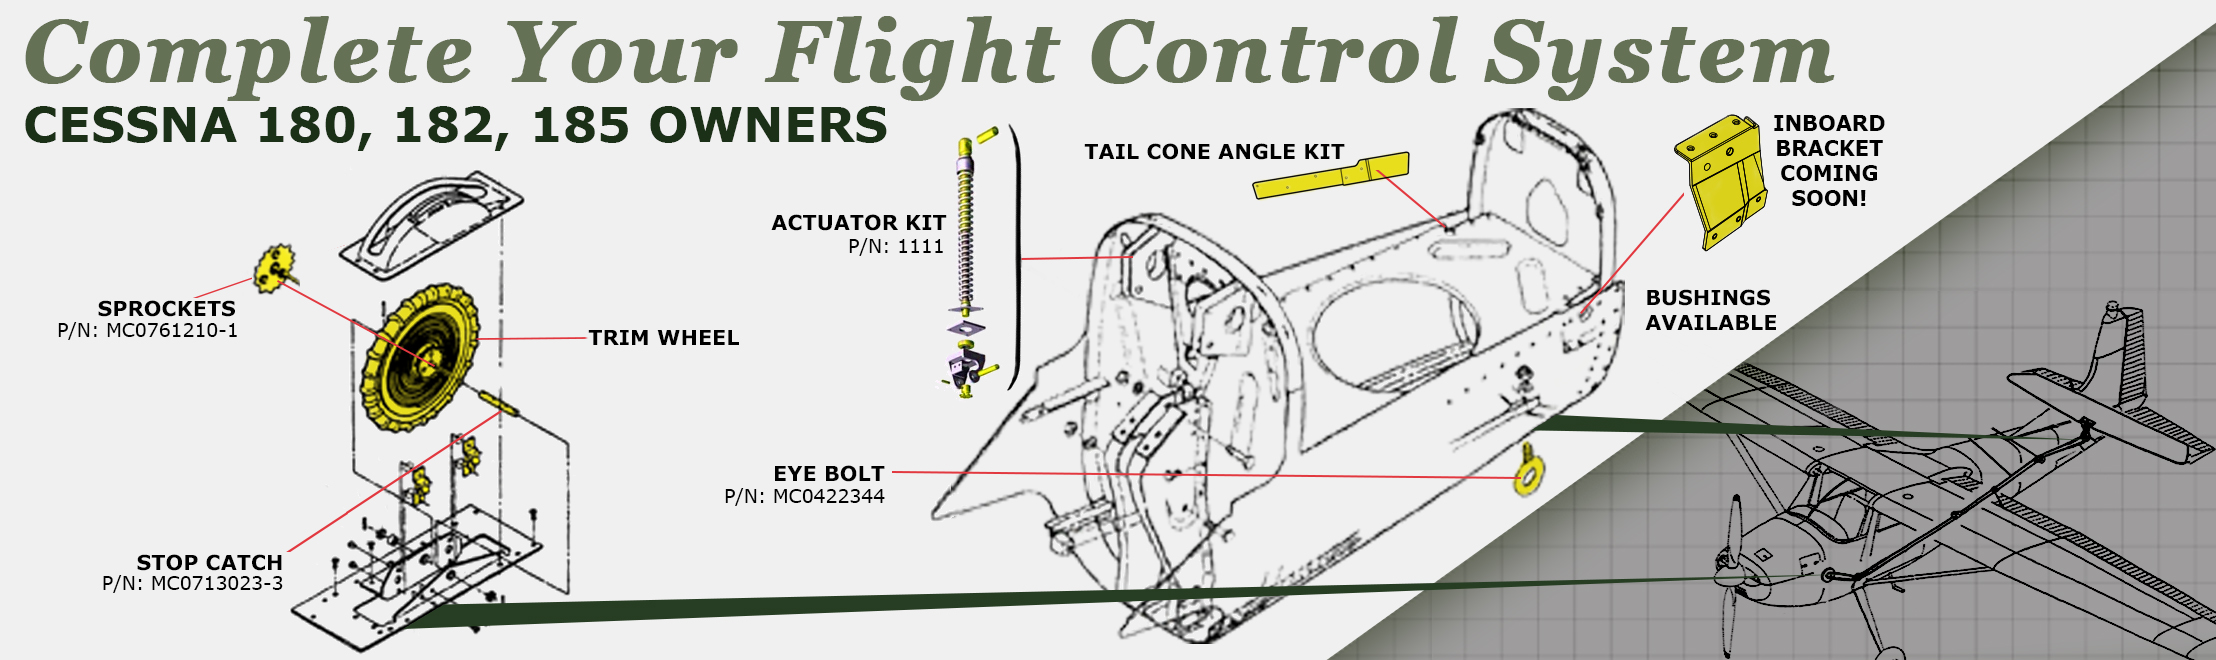 Complete Your Flight Control System